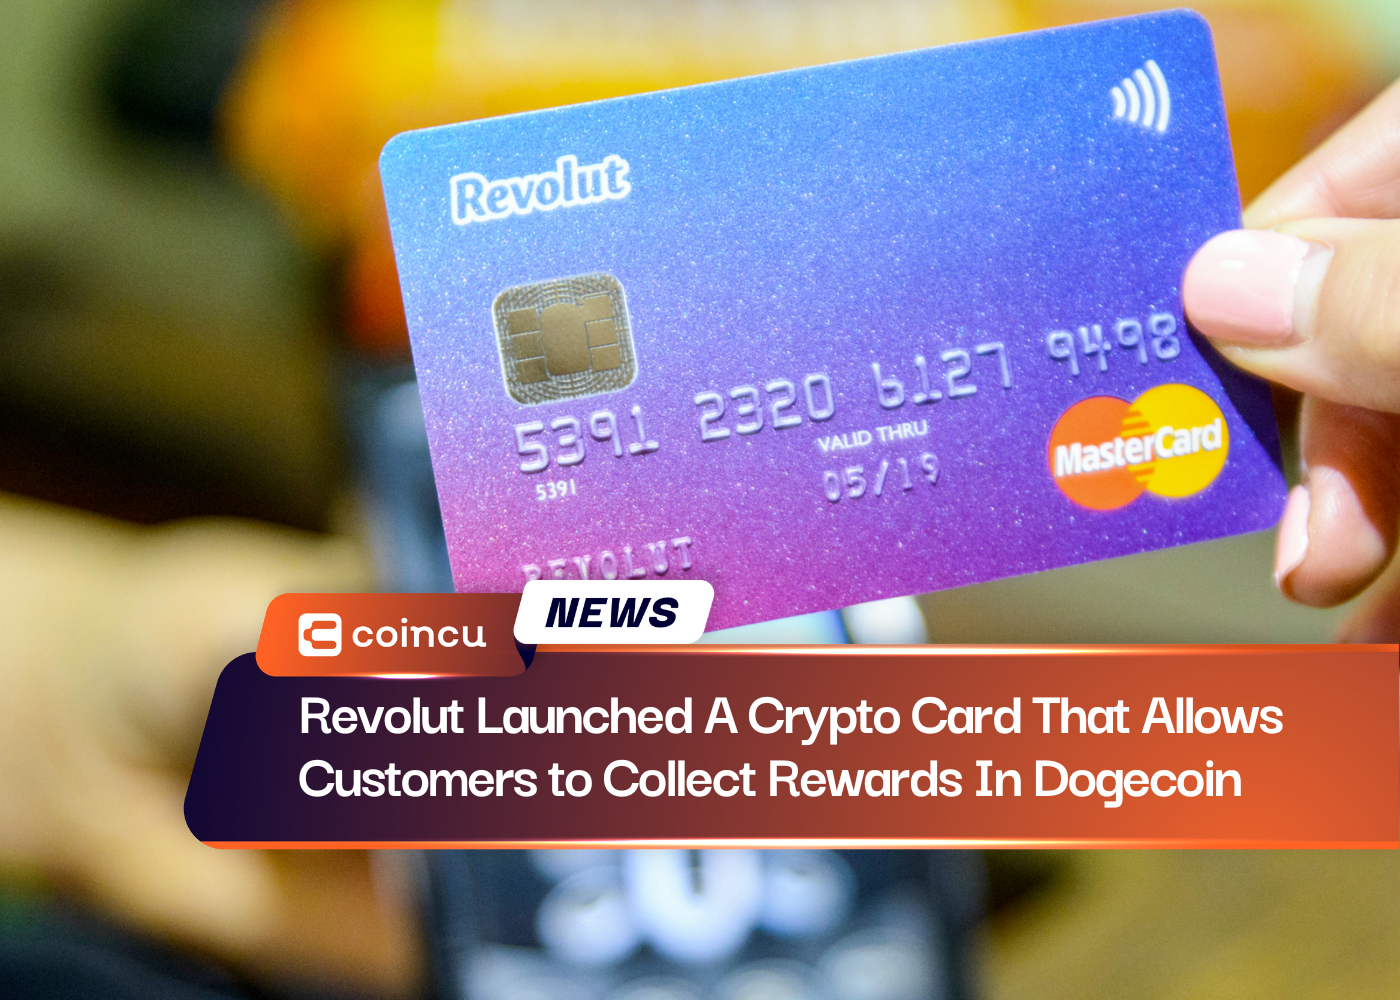 Revolut Launched A Crypto Card That Allows Customers to Collect Rewards In Dogecoin